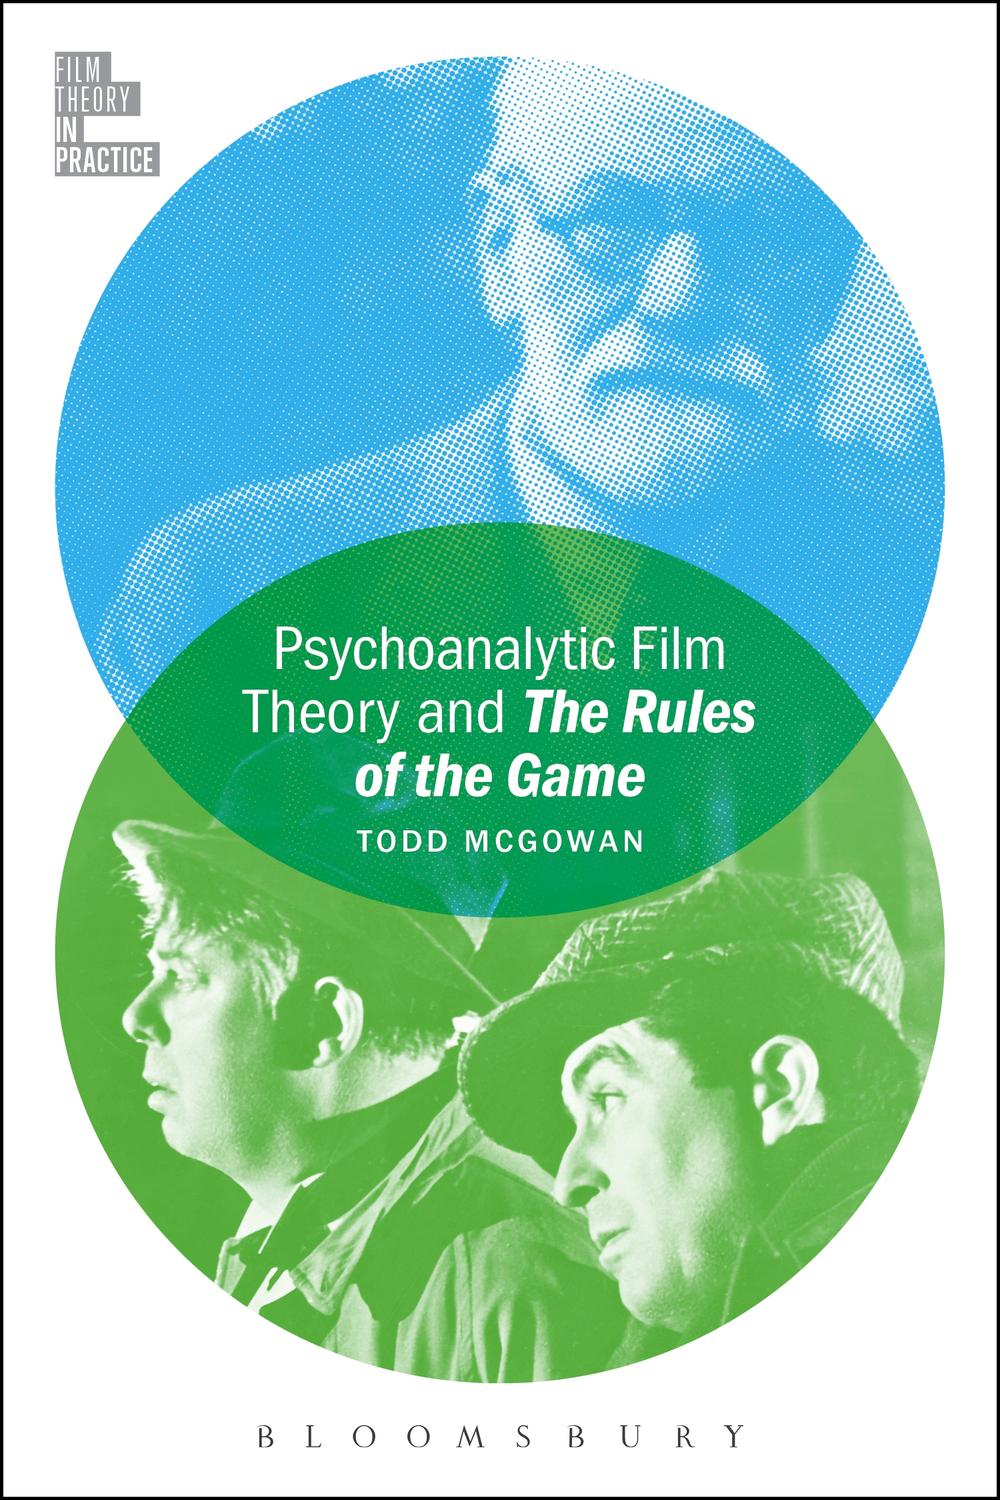 Psychoanalytic Film Theory and The Rules of the Game - Todd McGowan